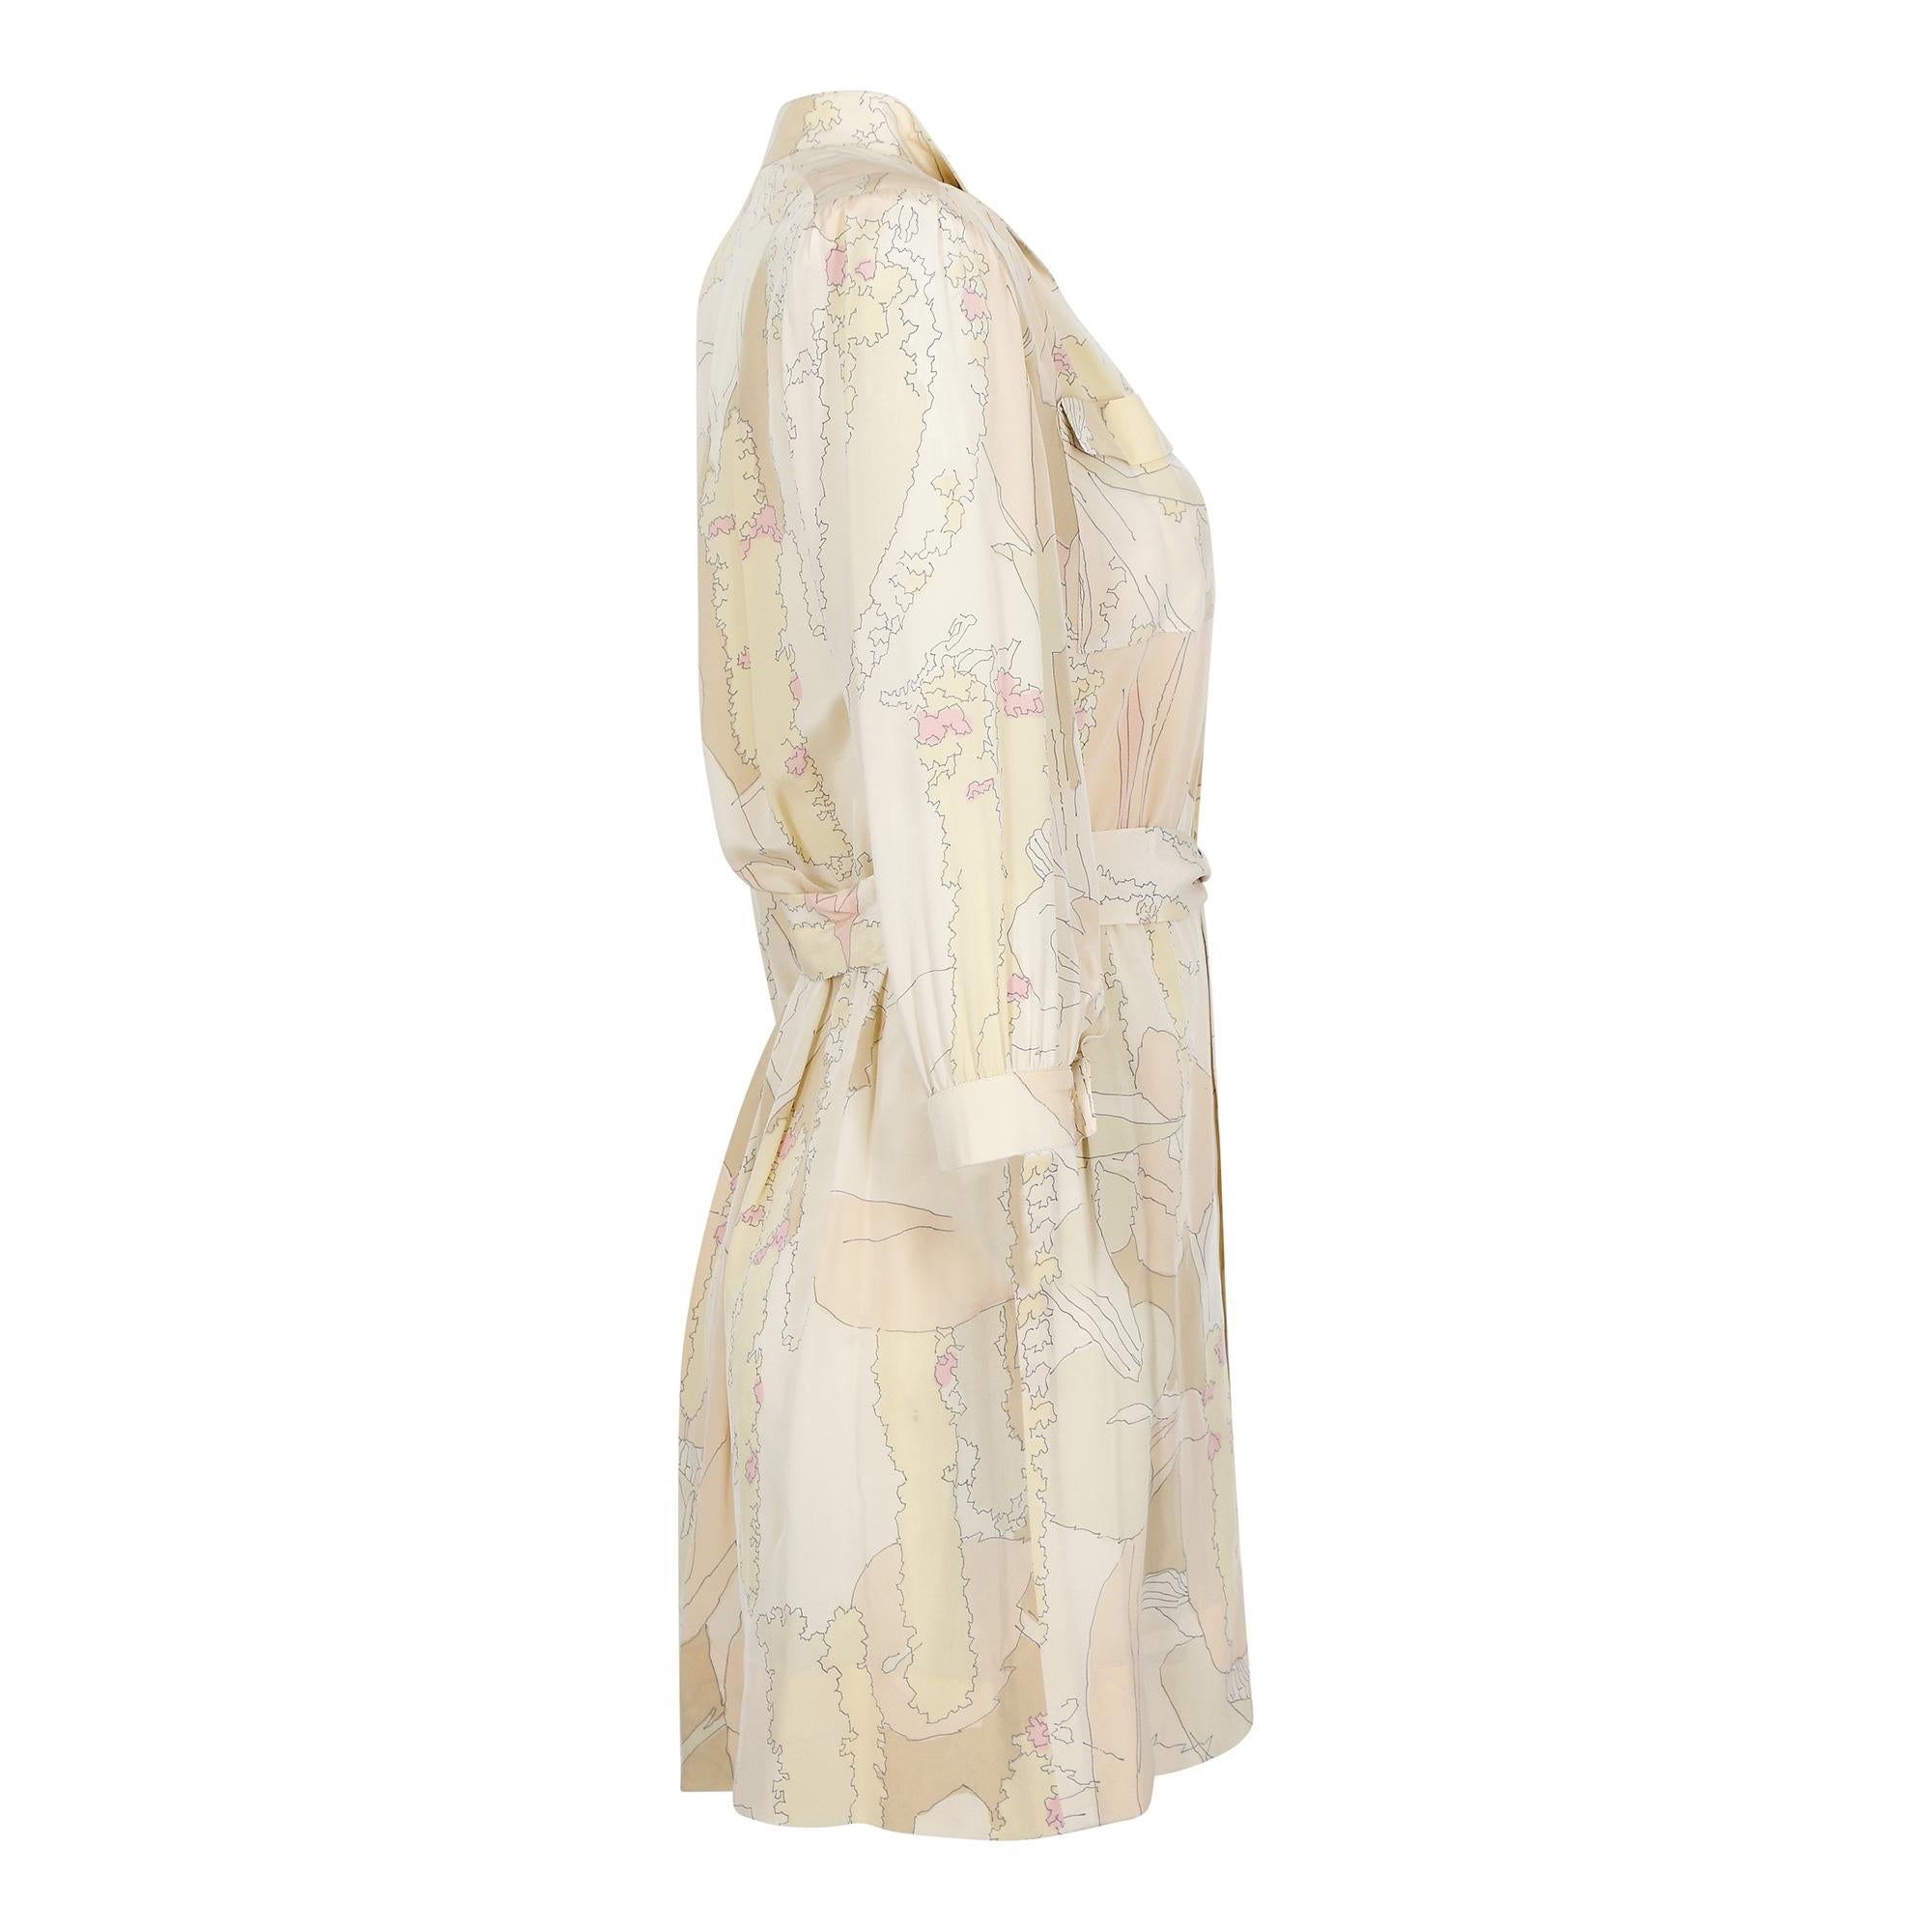 A stylish 1970s daywear piece by revered designer Ted Lapidus who began his long fashion career at the house of Dior before branching out on his own in 1951.  He is known for his unisex style of dressing and was worn by leading French stars of the